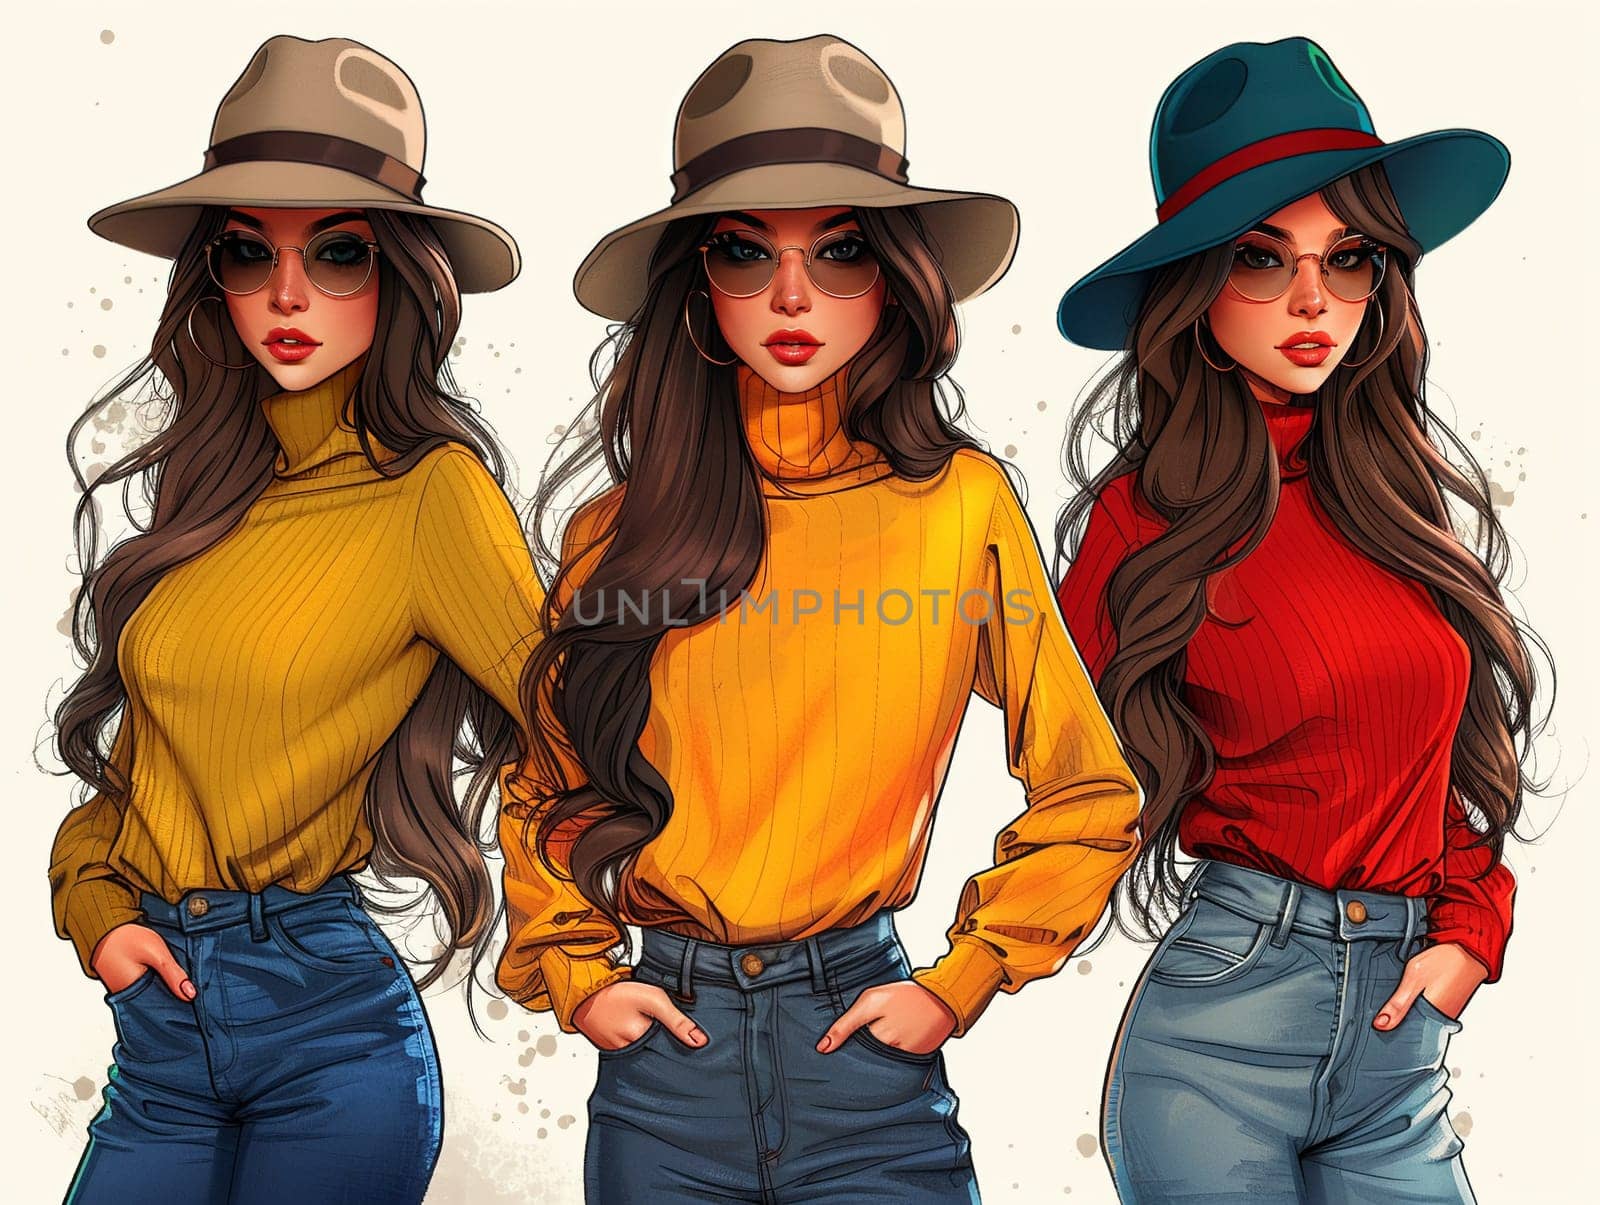 Fashion blogger cartoon character, adding brightness with trendy outfits and a chic lifestyle.